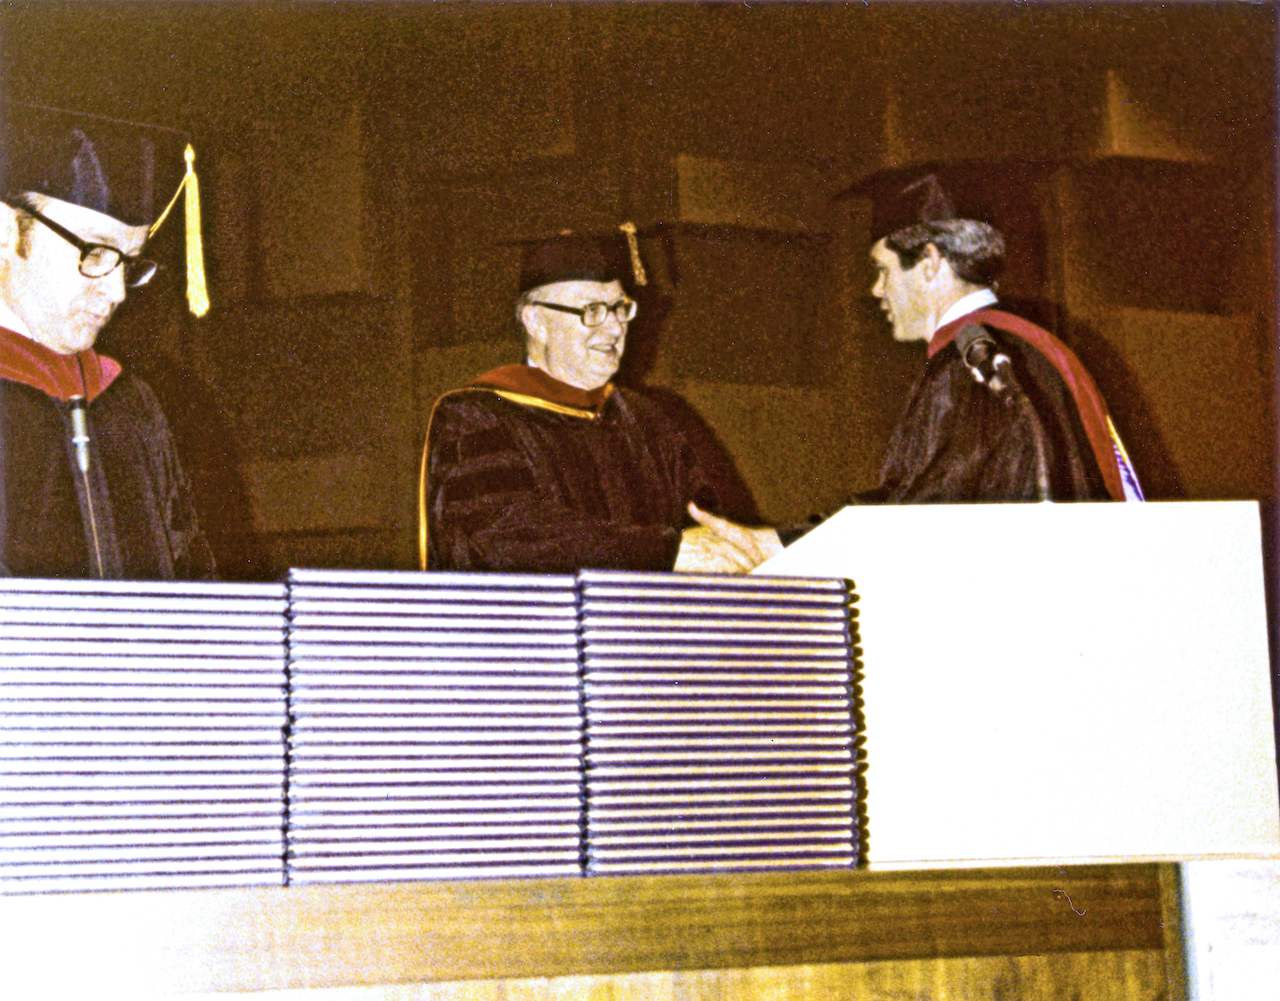 Dr. Malphurs shaking hands while receiving his degree from DTS